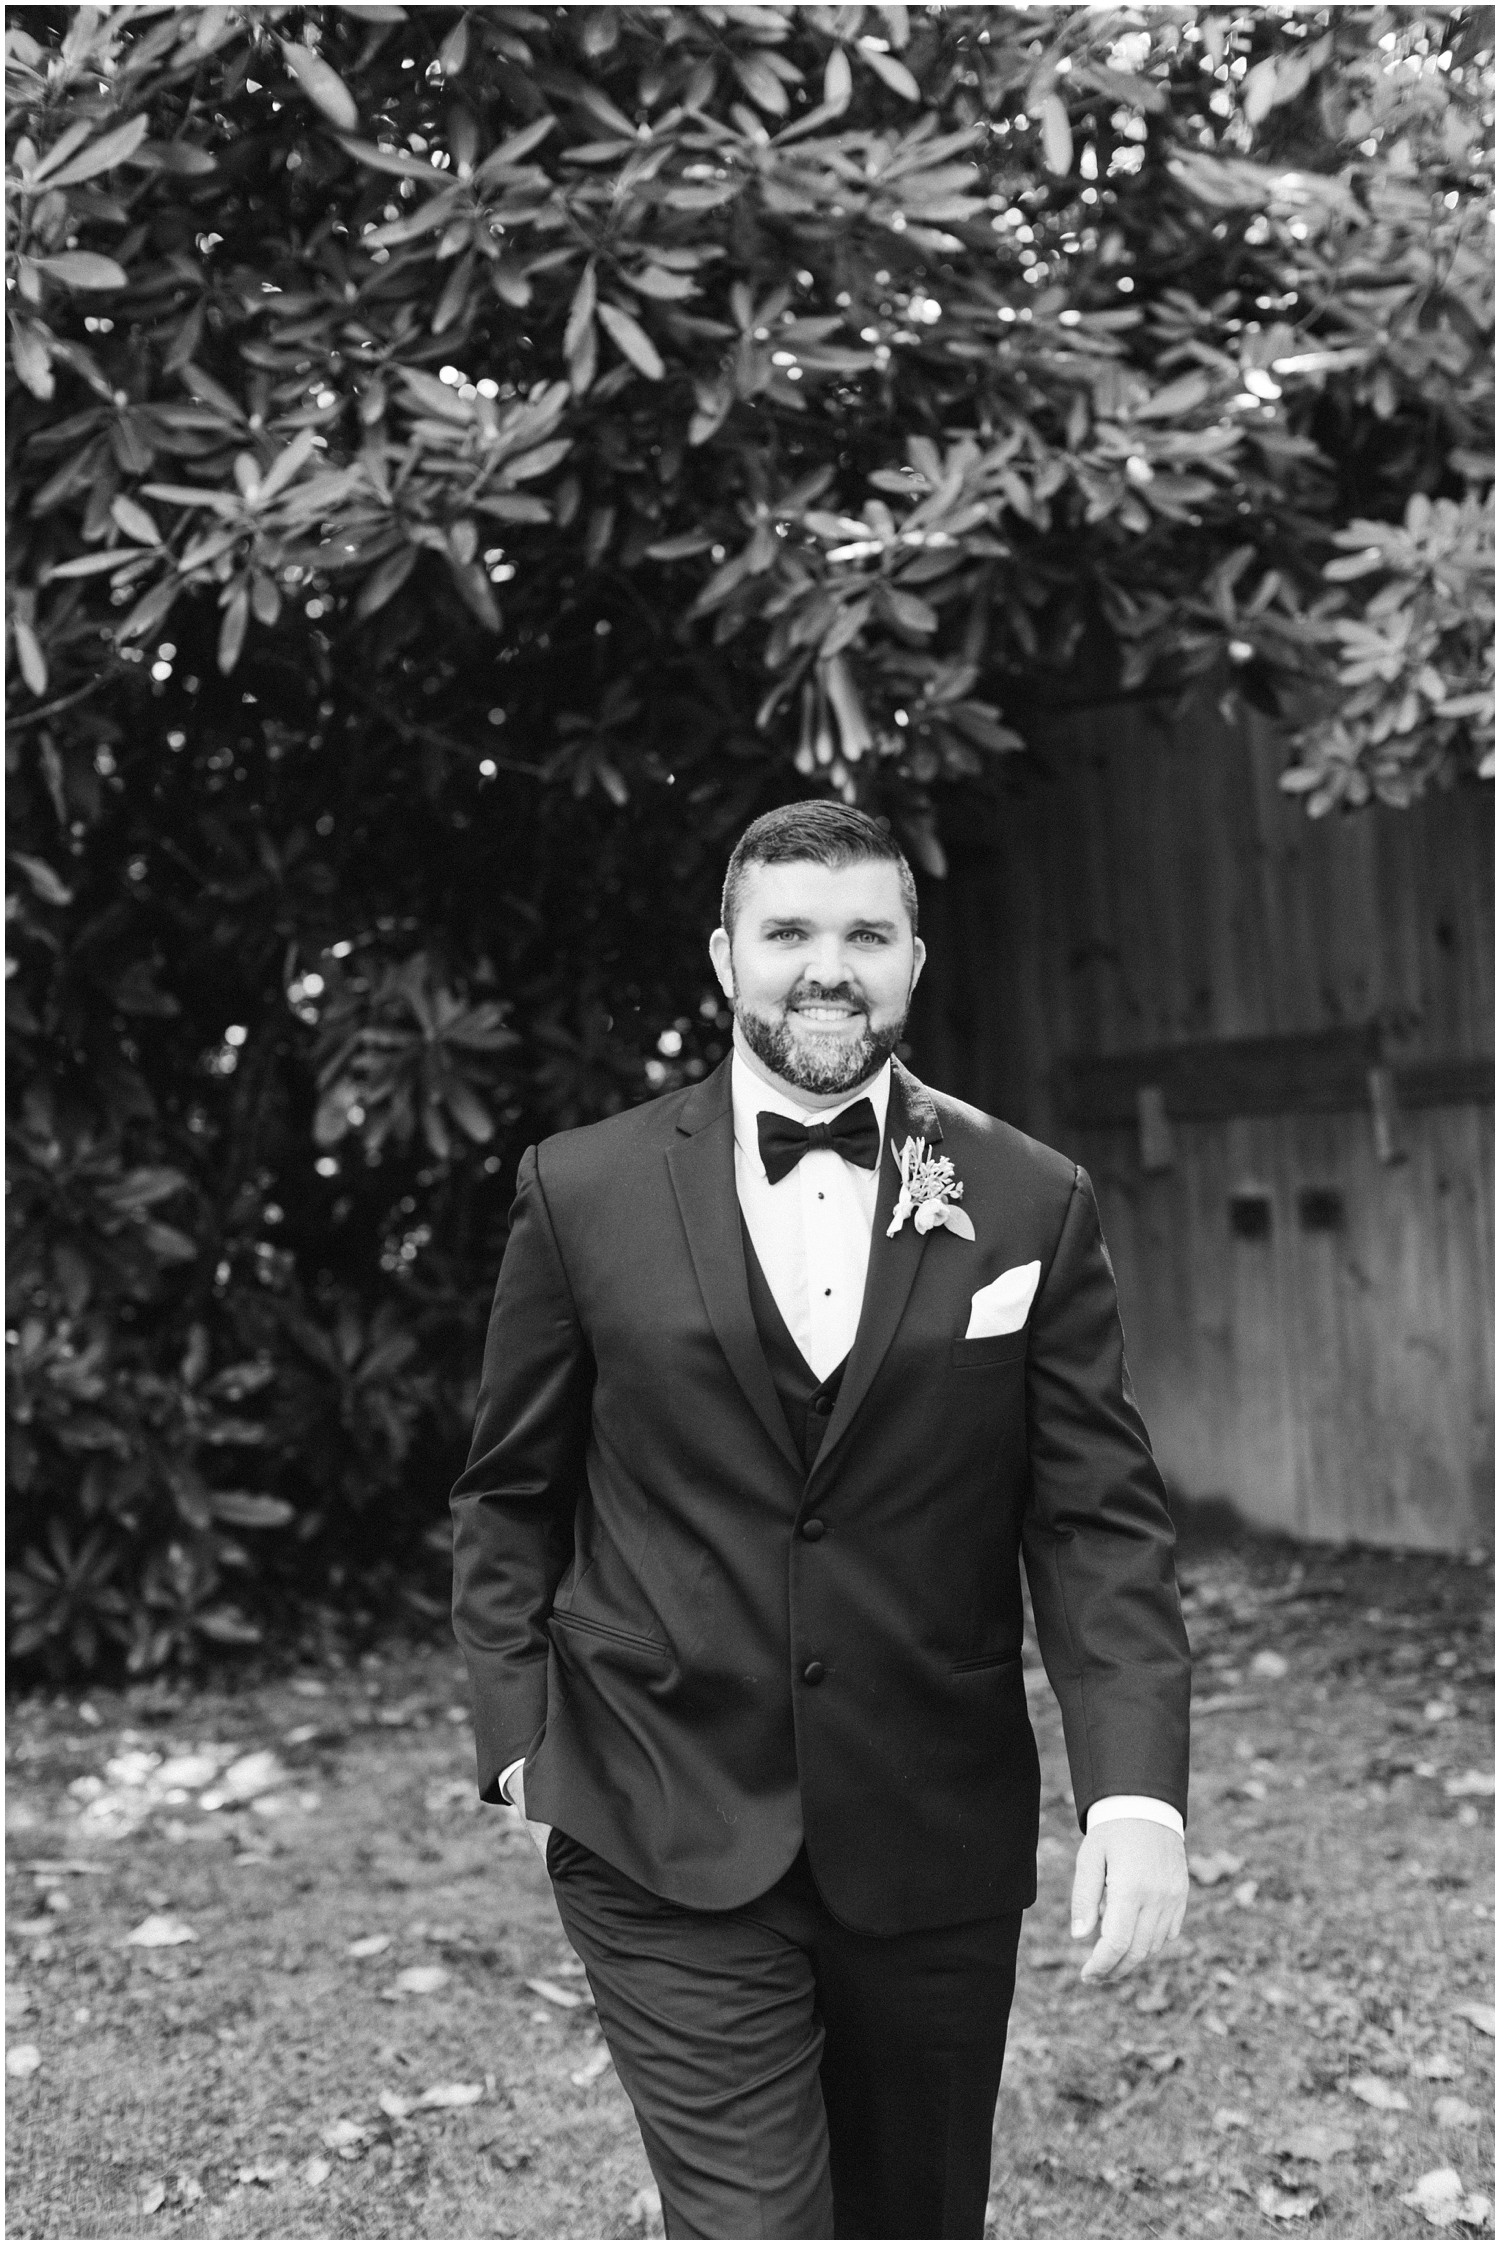 black and white portrait of groom in tux on wedding day